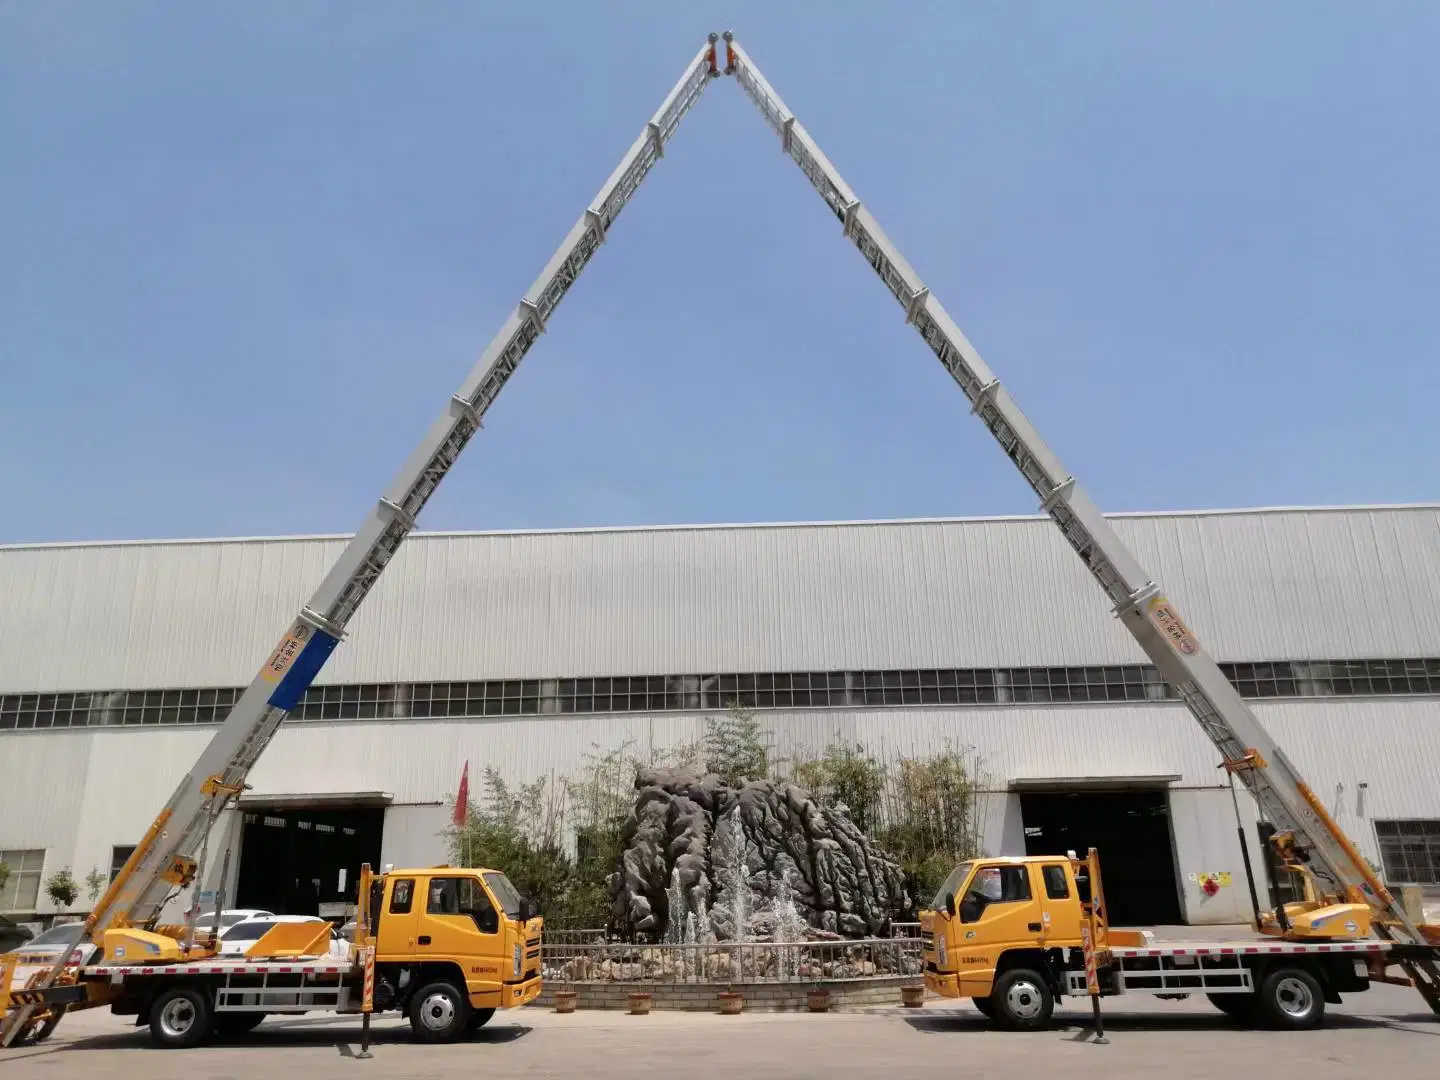 Boom Lift Telescopic Lifts for Air-Condition Installation